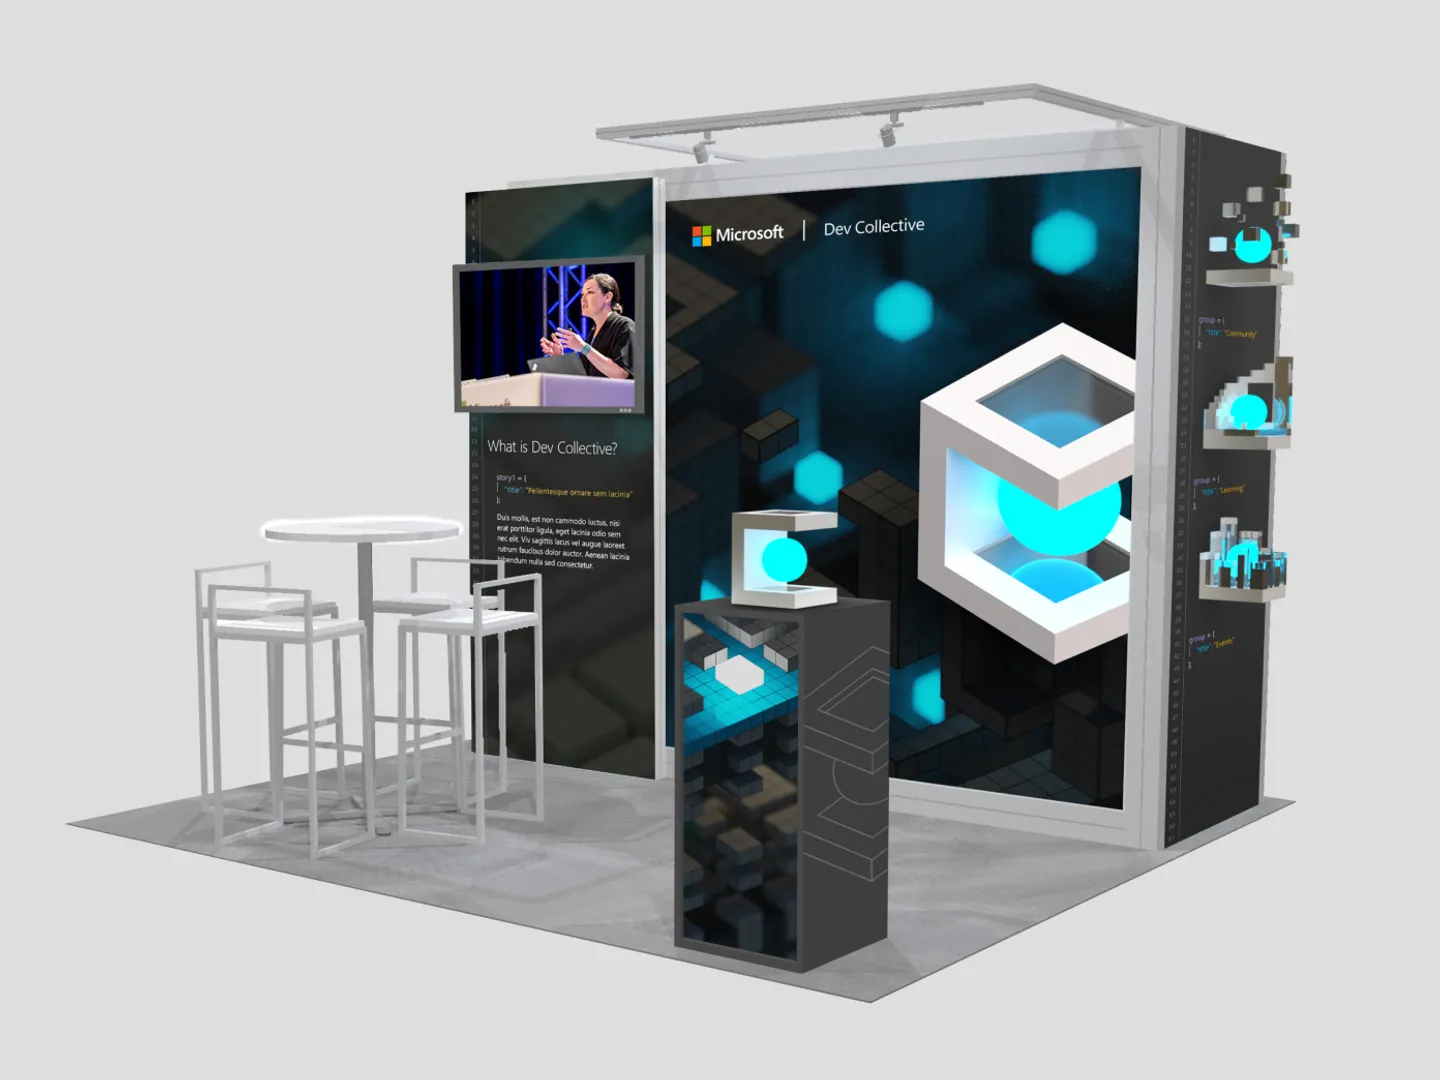 Booth design featuring Dev Collective branding and visuals